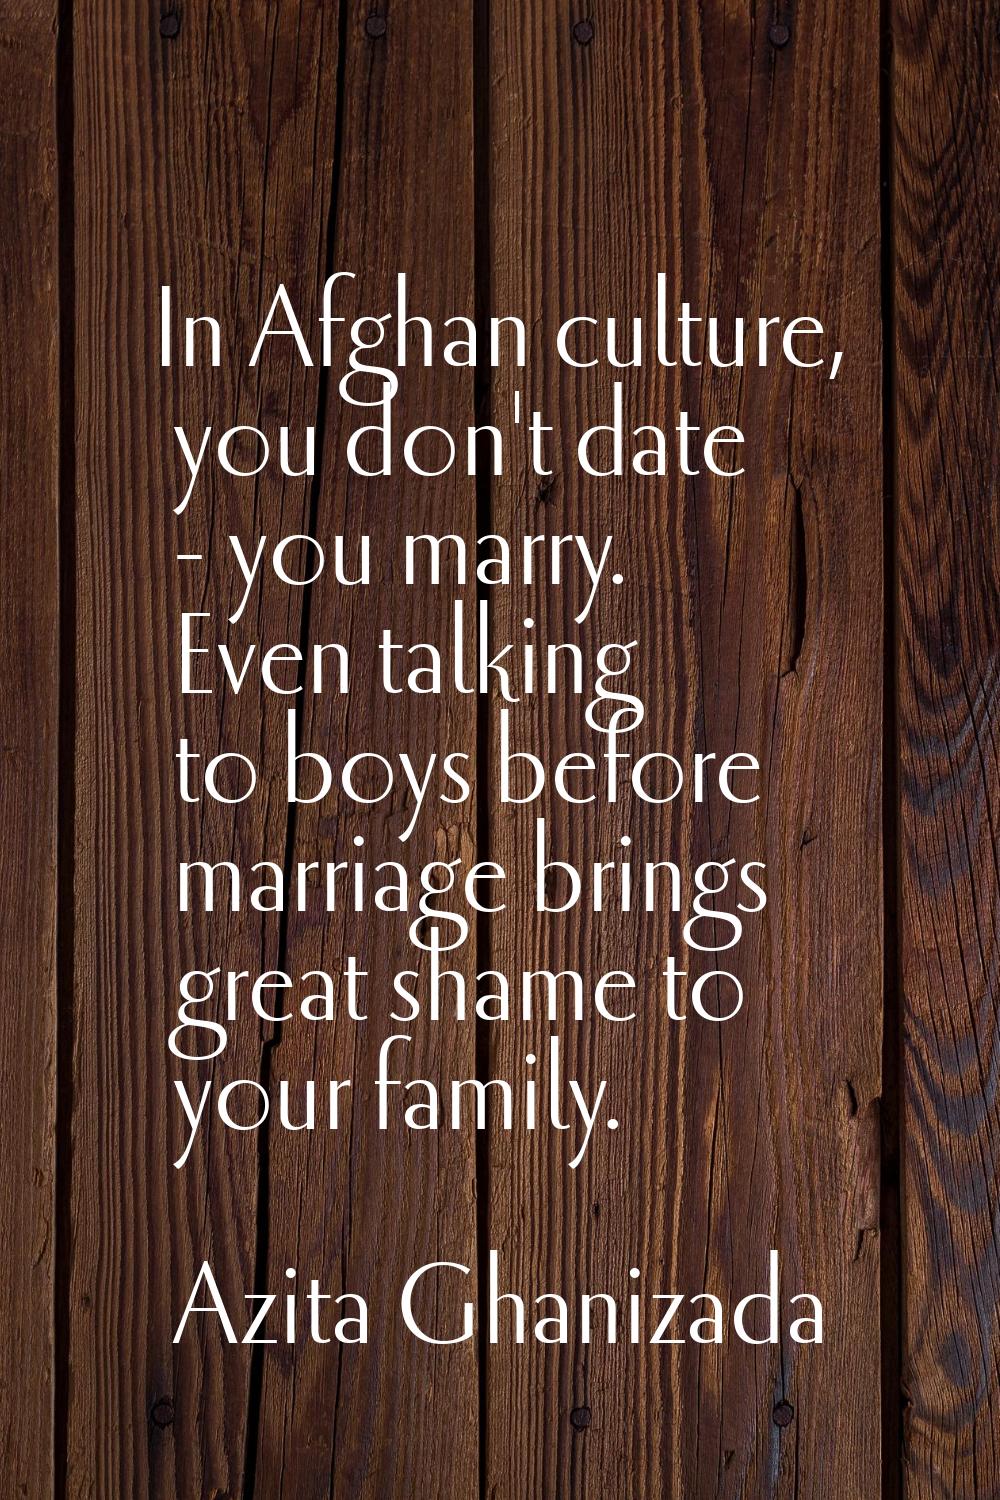 In Afghan culture, you don't date - you marry. Even talking to boys before marriage brings great sh